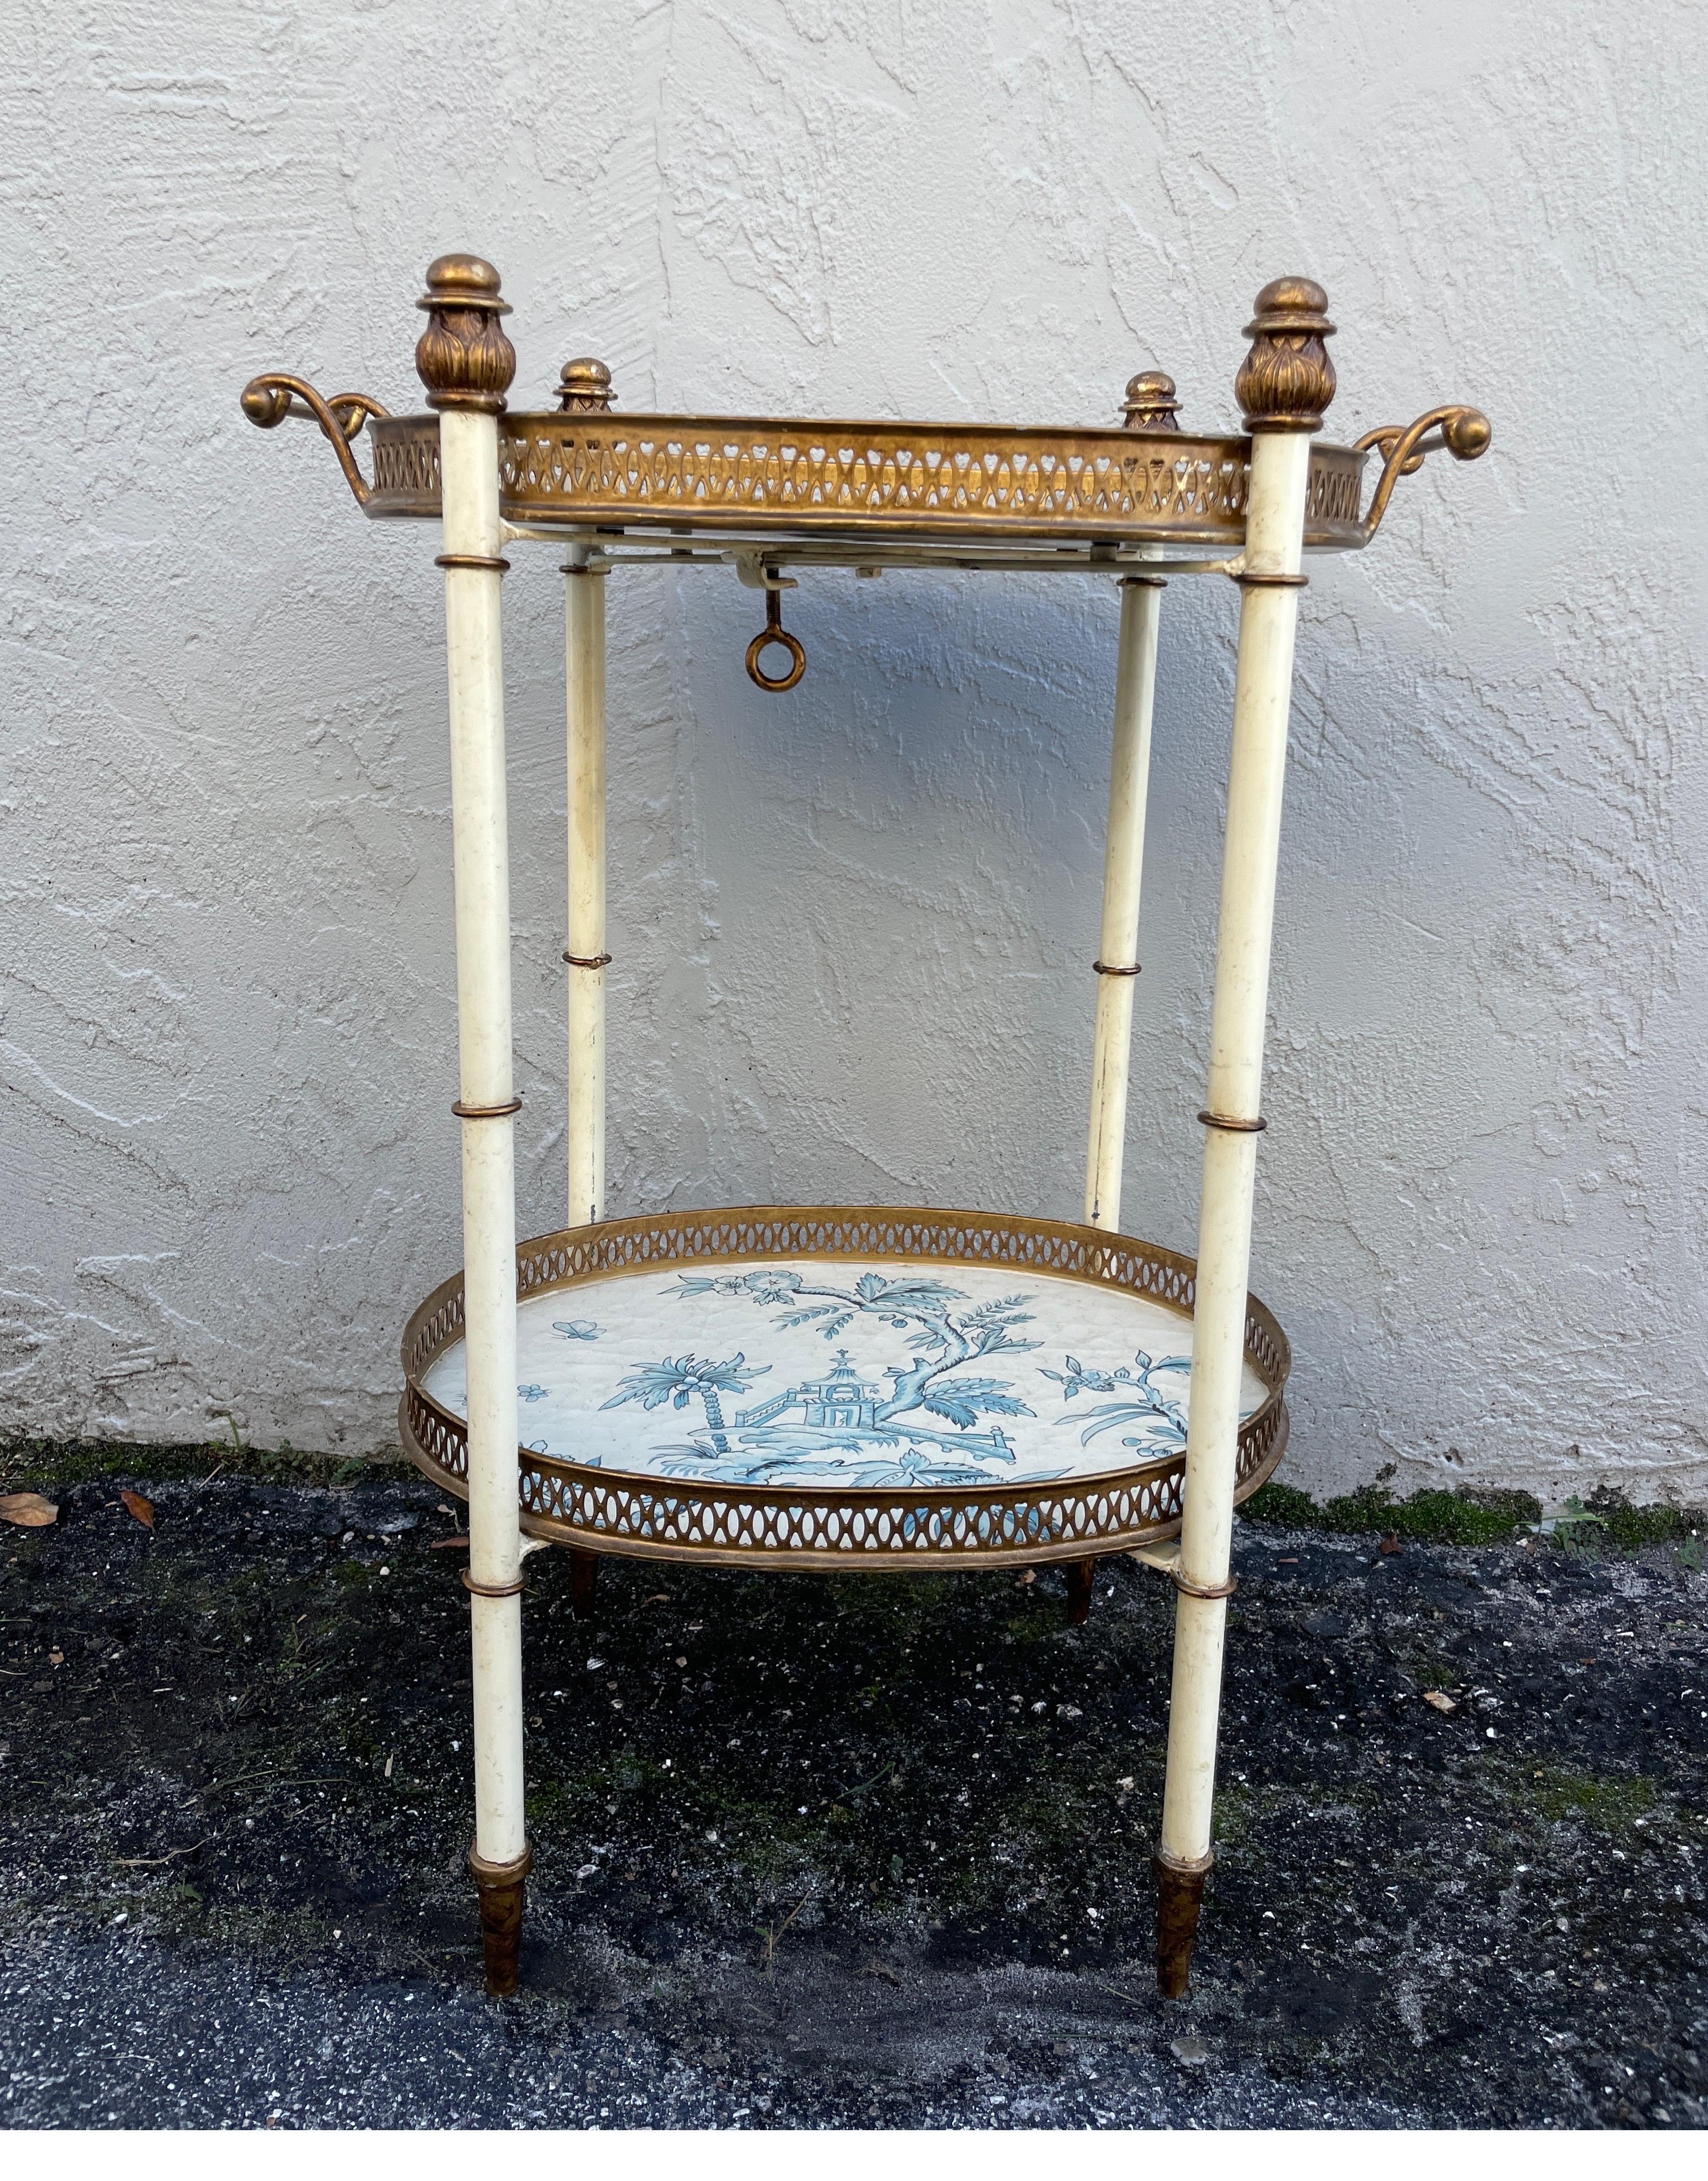 Beautiful two-tiered Chinoiserie design tray table in blue and cream. This piece would look good anywhere. It's just very special.